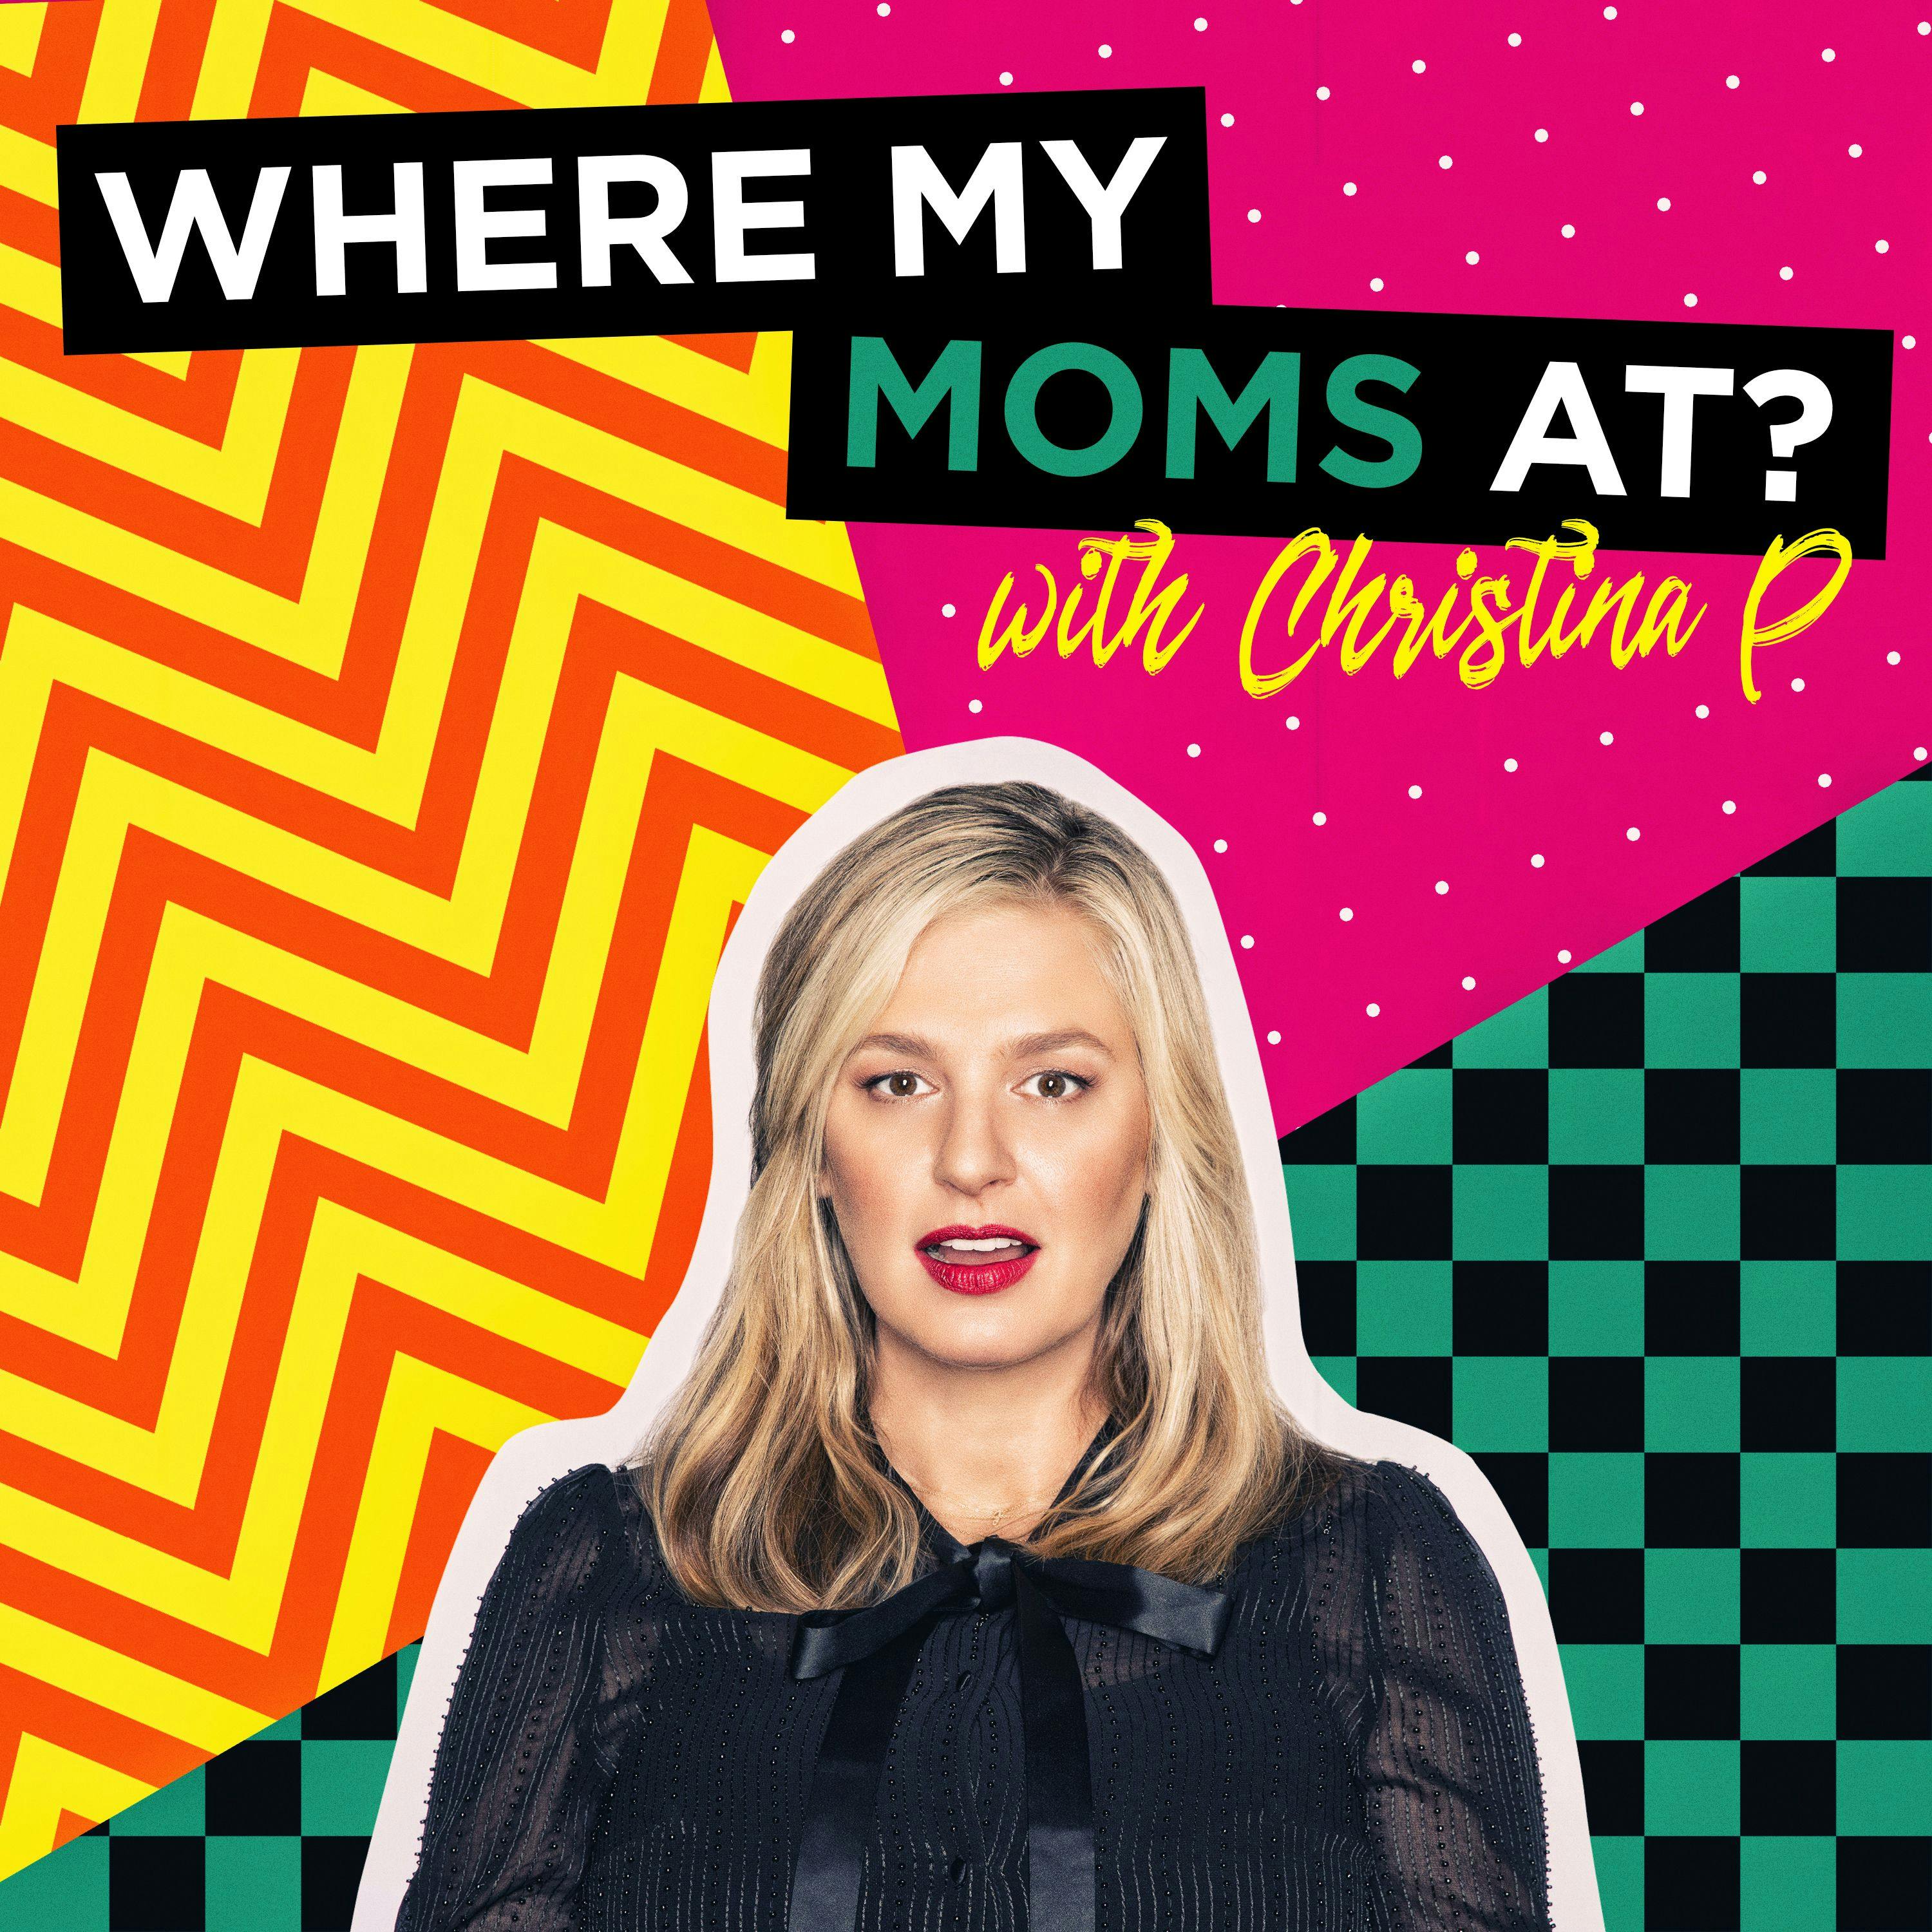 Ep. 36 - Who's The MOST Messed Up? - Where My Moms At w/ Christina P.